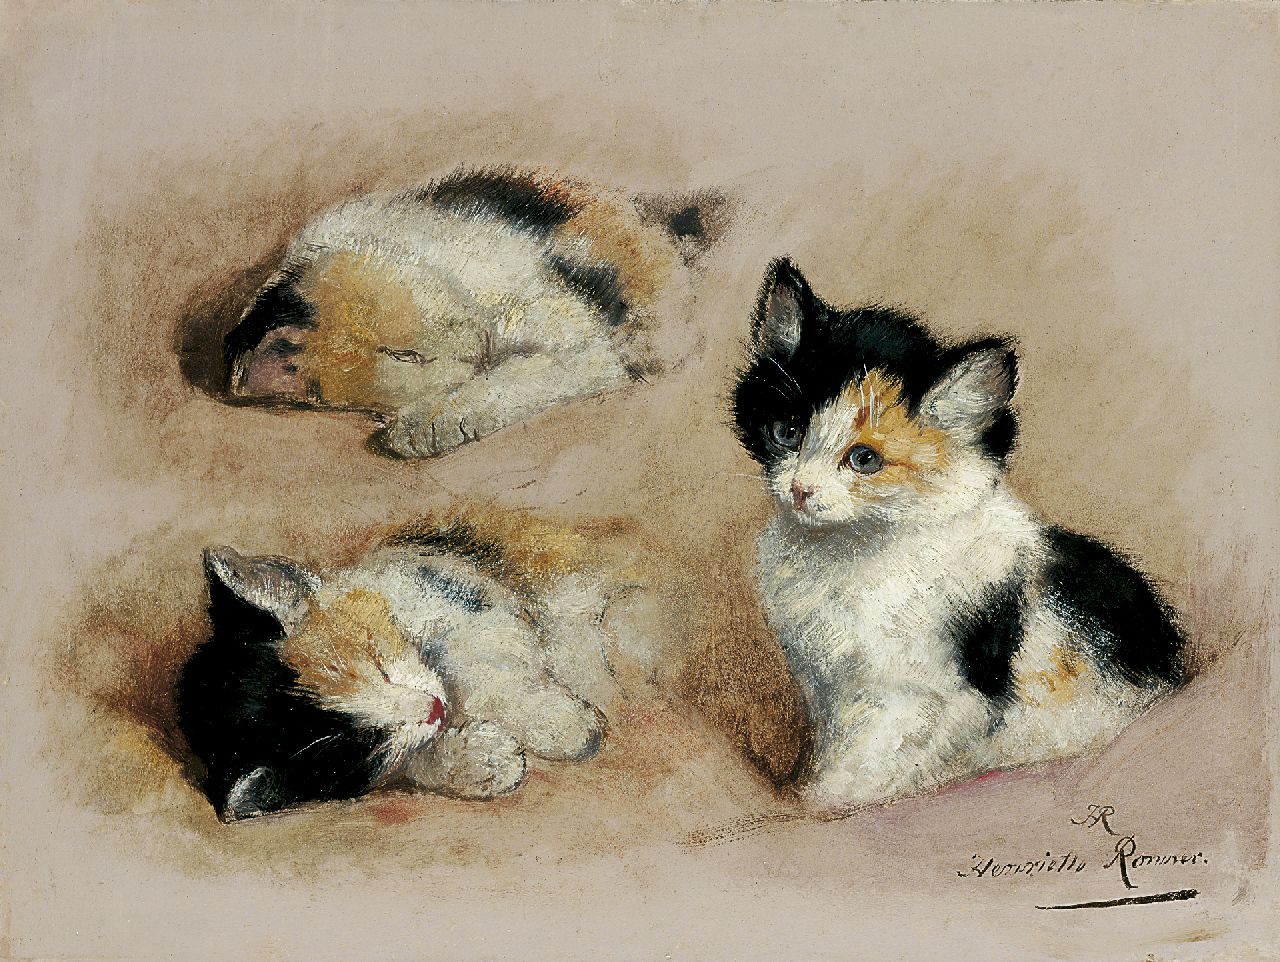 Ronner-Knip H.  | Henriette Ronner-Knip, Study of a kitten, oil on paper laid down on panel 27.1 x 36.1 cm, signed l.r. with initials and in full